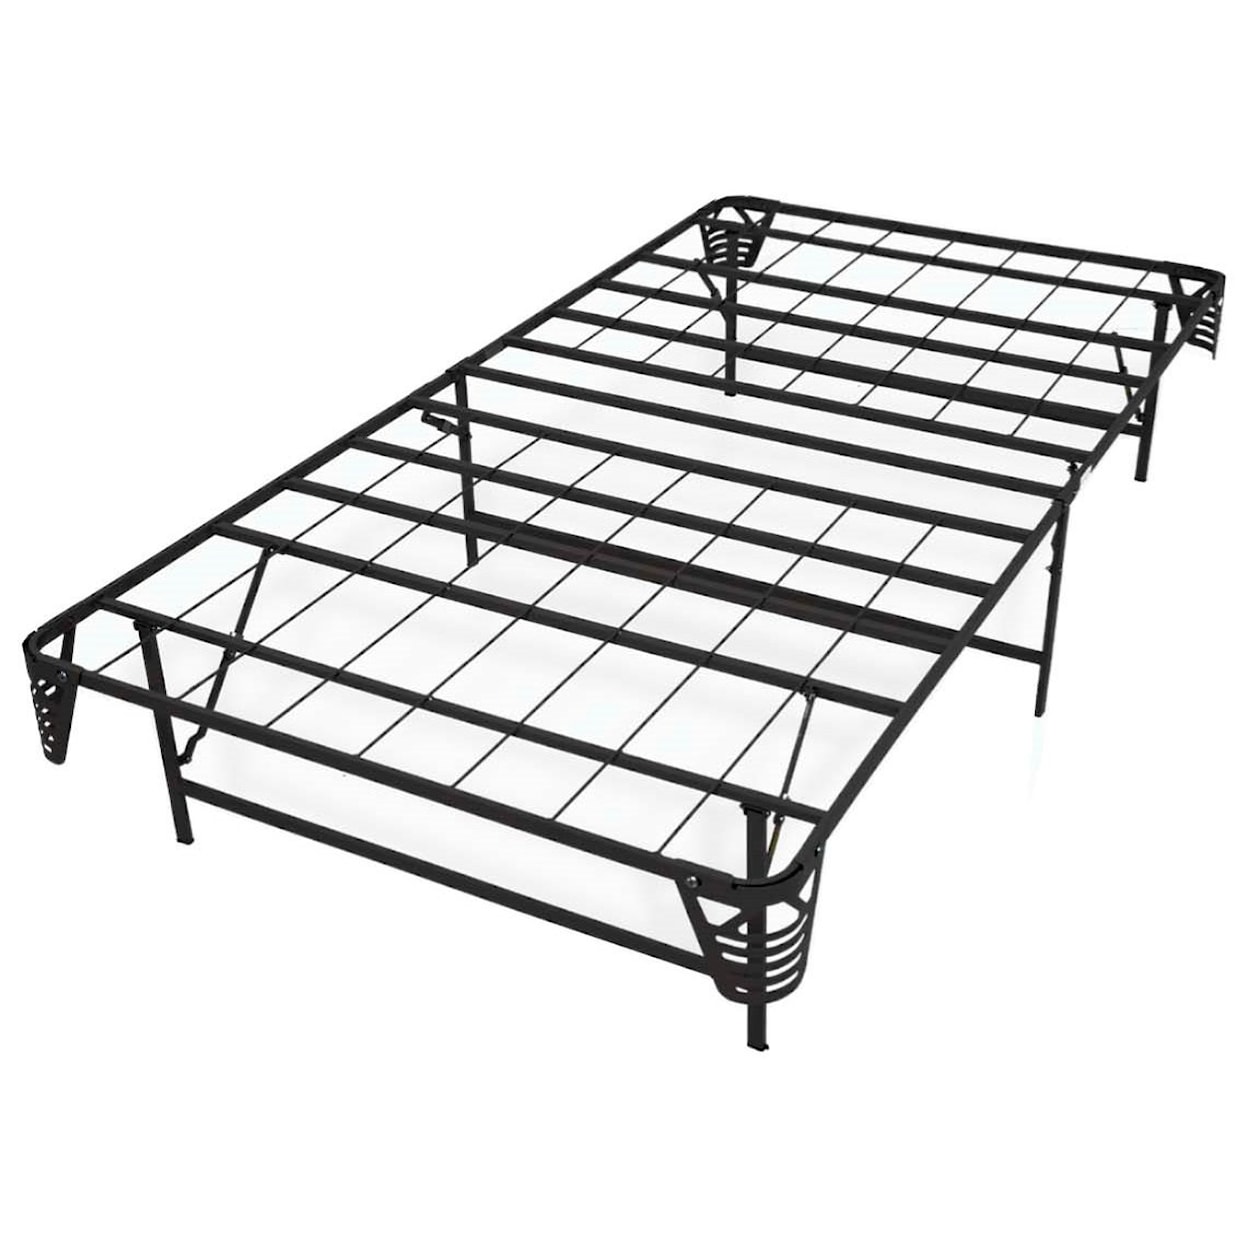 Glideaway Space Saver Bed Frame Cal King Space Saver Bed Frame